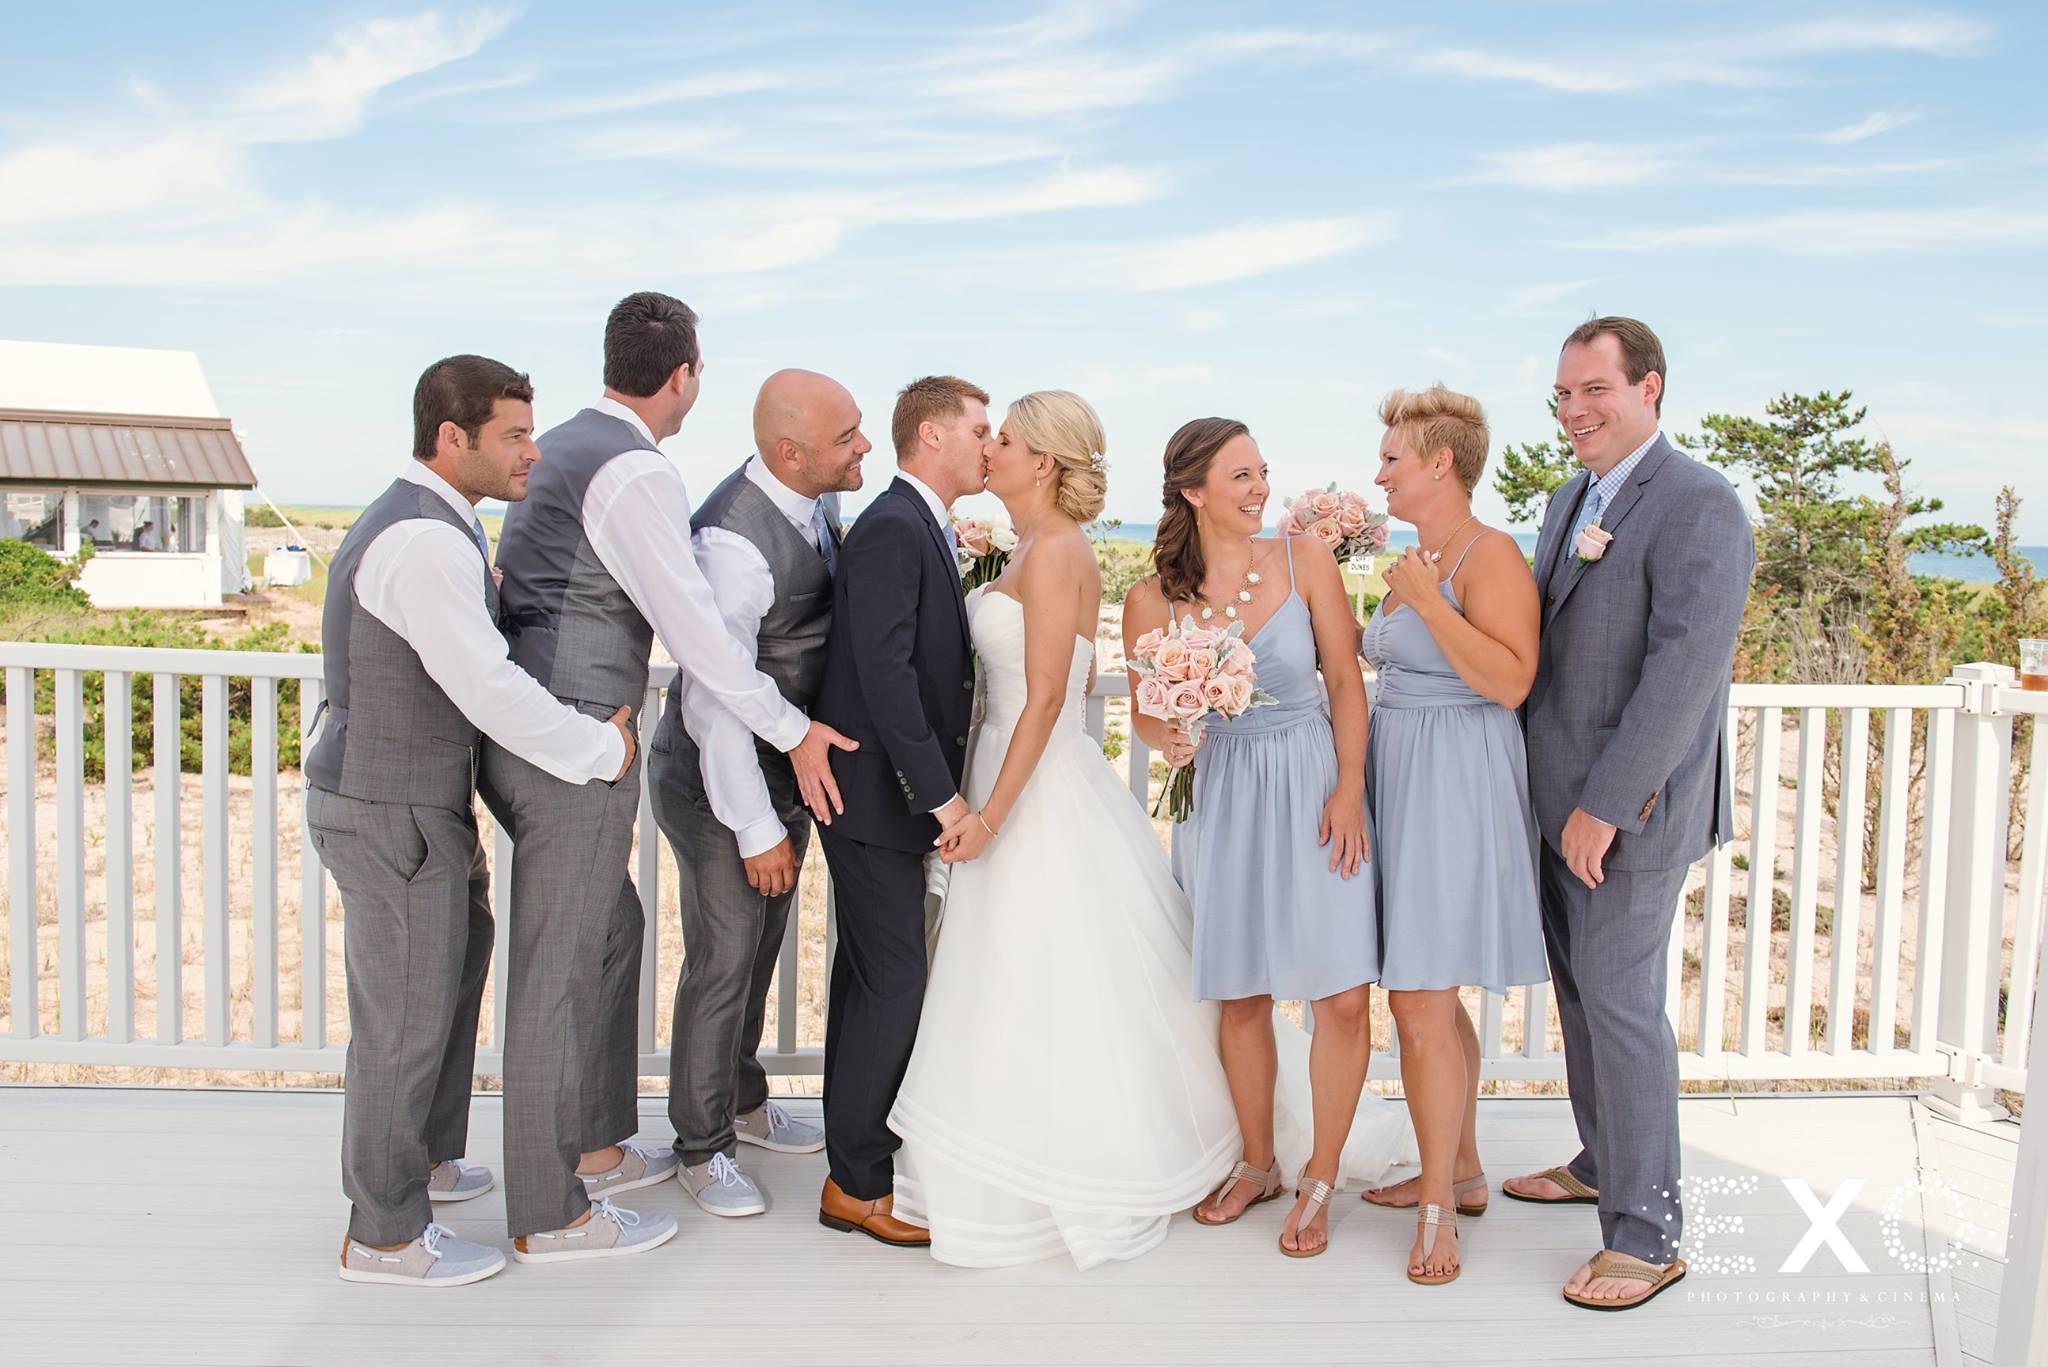 bride, groom, and wedding party standing together